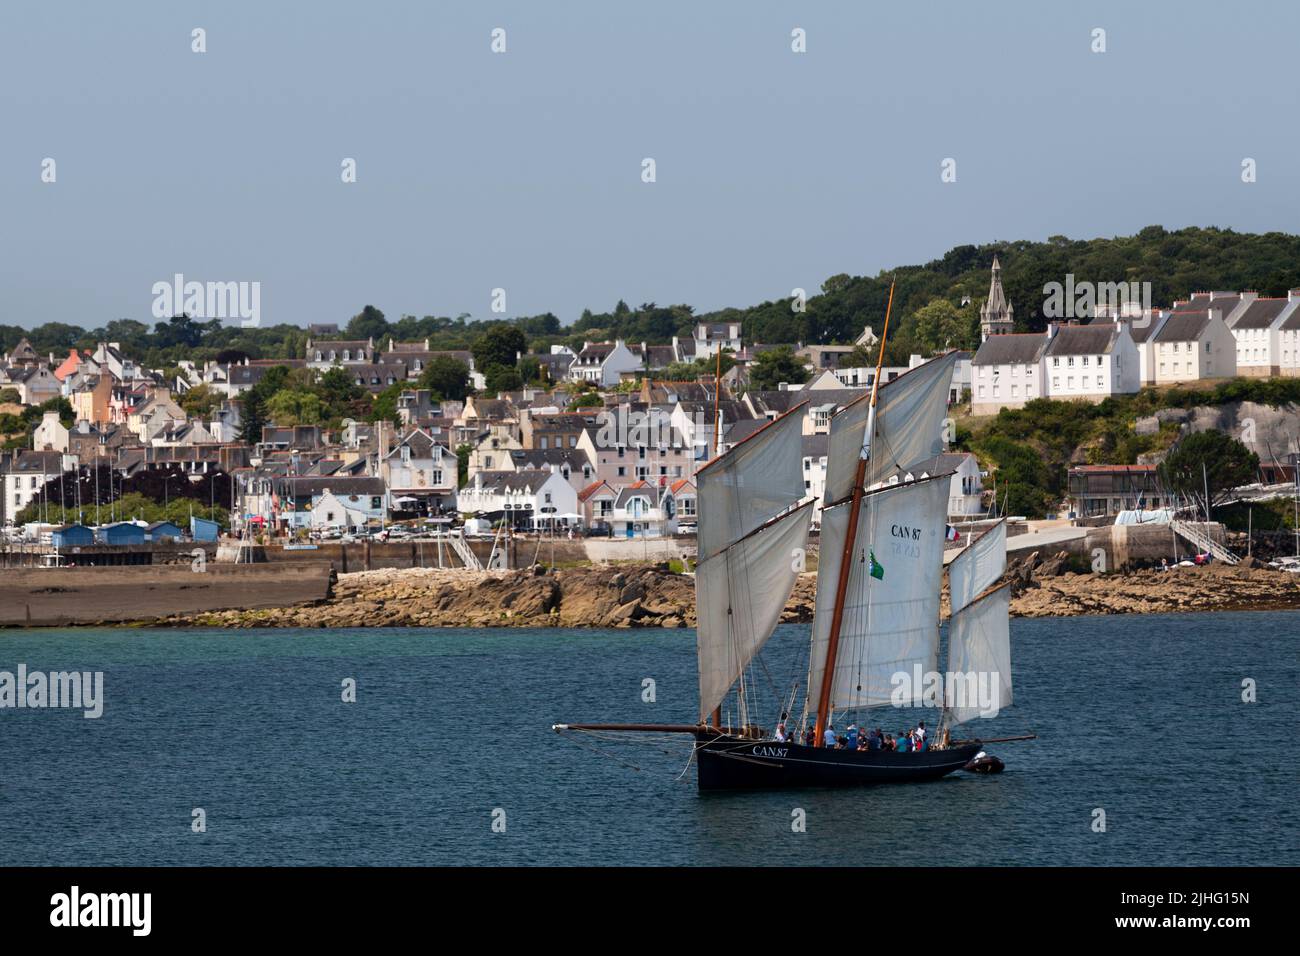 Douarnenez, France - July 17 2022: La Cancalaise is a bisquine replica built in 1987 in Cancale. She is rigged as a three-masted fishing lugger with f Stock Photo